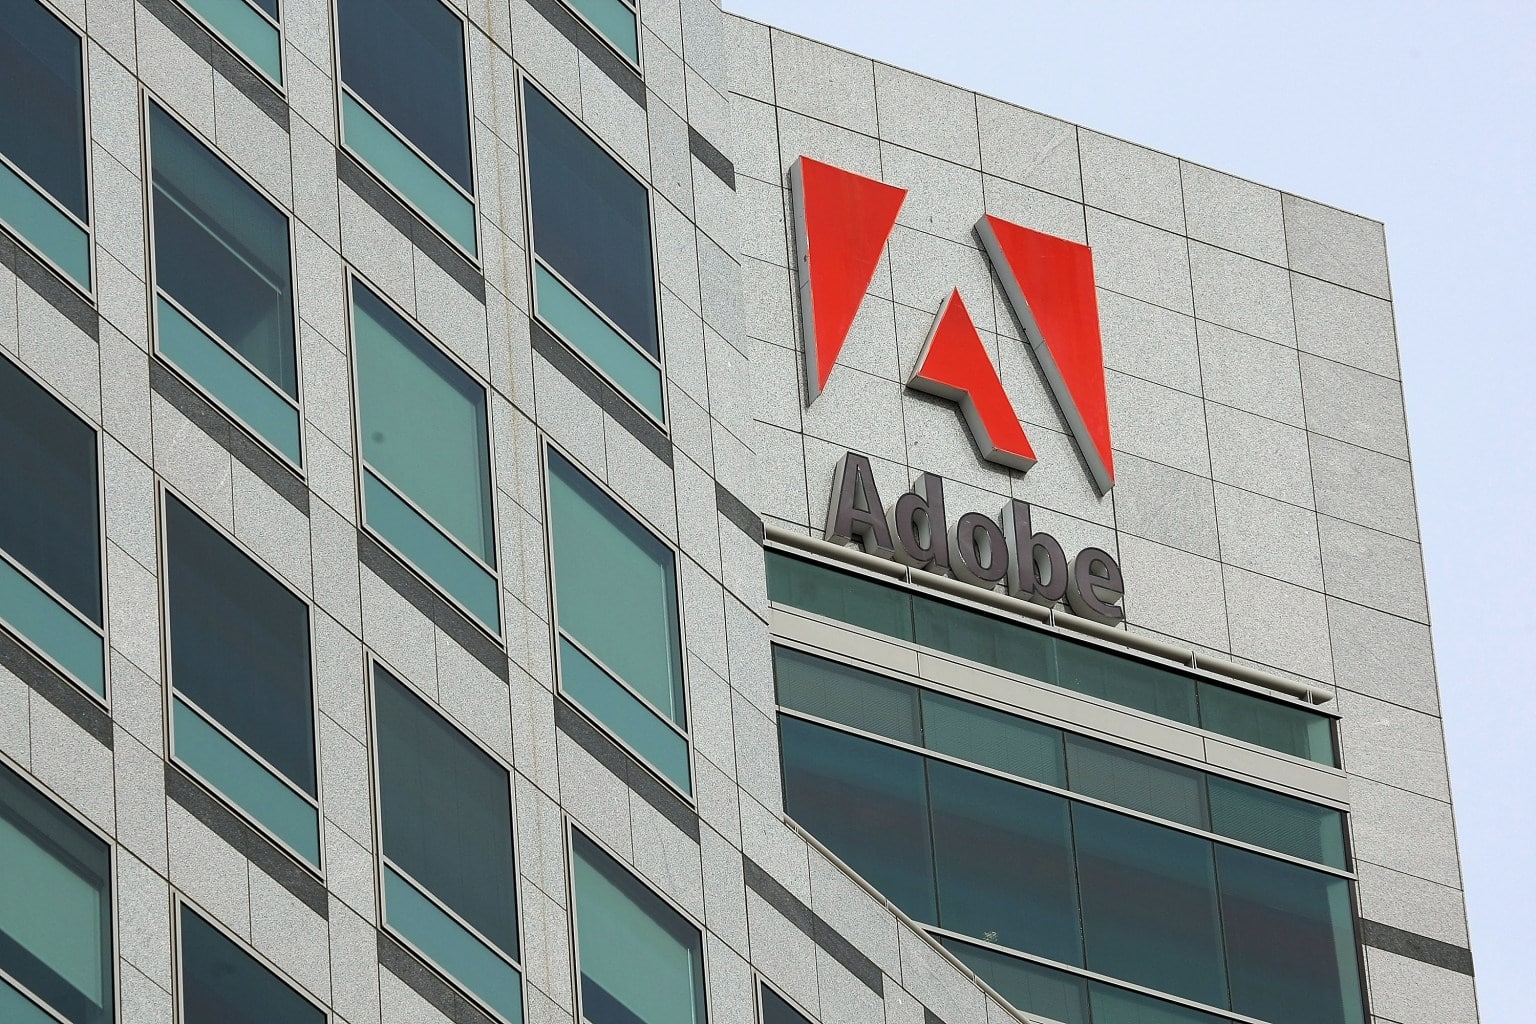 A modern high-rise building features the Adobe logo prominently near its top. The façade consists of gray stone with large, green-tinted glass windows. The Adobe logo shows a red stylized "A" above the word "Adobe" written in gray. The sky is clear, presenting a clean, corporate aesthetic.